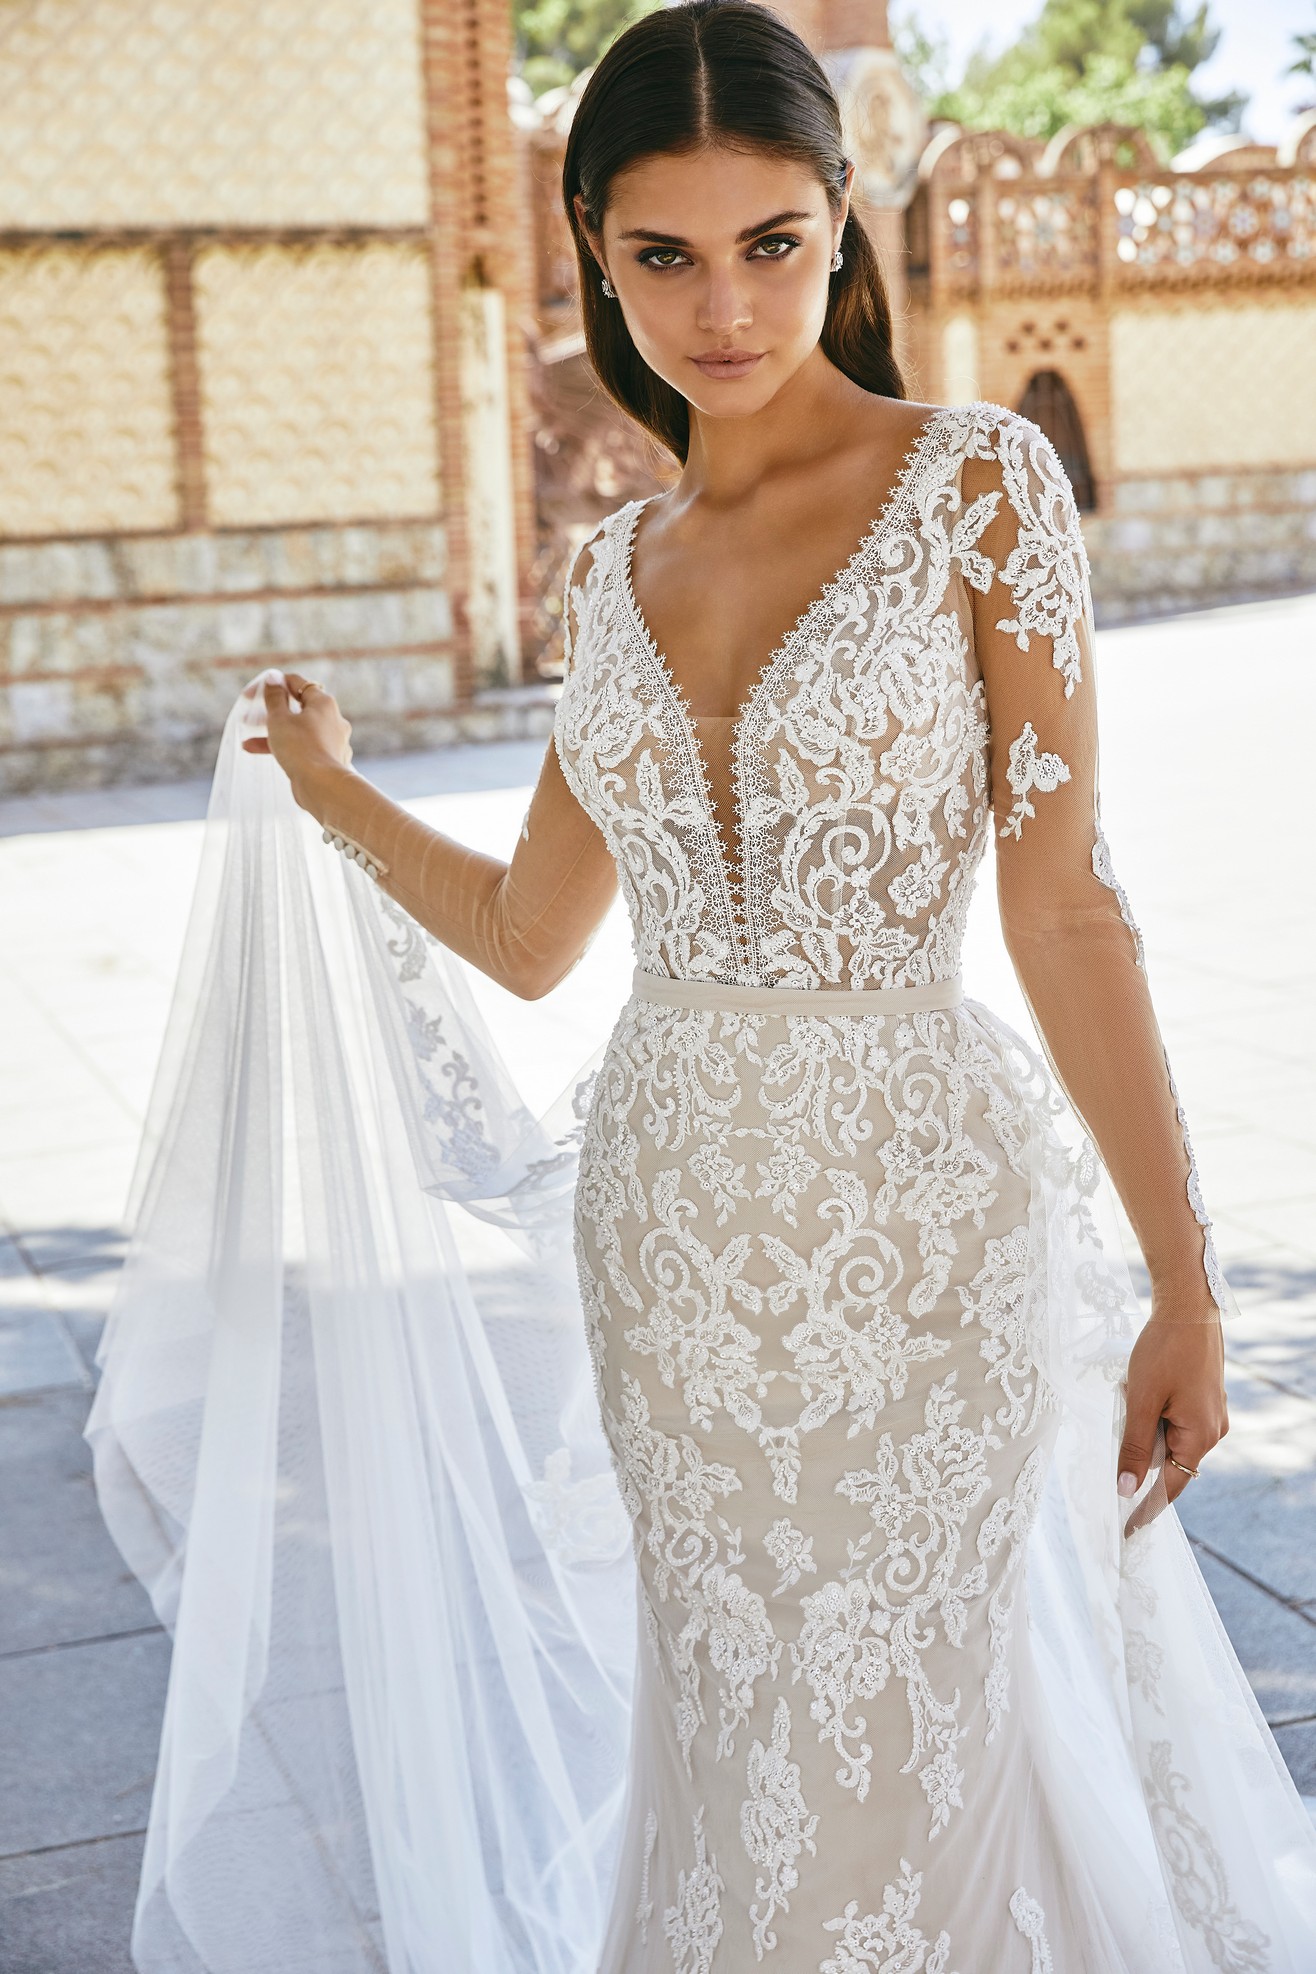 A close up of a brunette model stood in a sunny street in Ronald Joyce 69716, a lace applique wedding dress with long illusion lace sleeves and a plunging illusion neckline